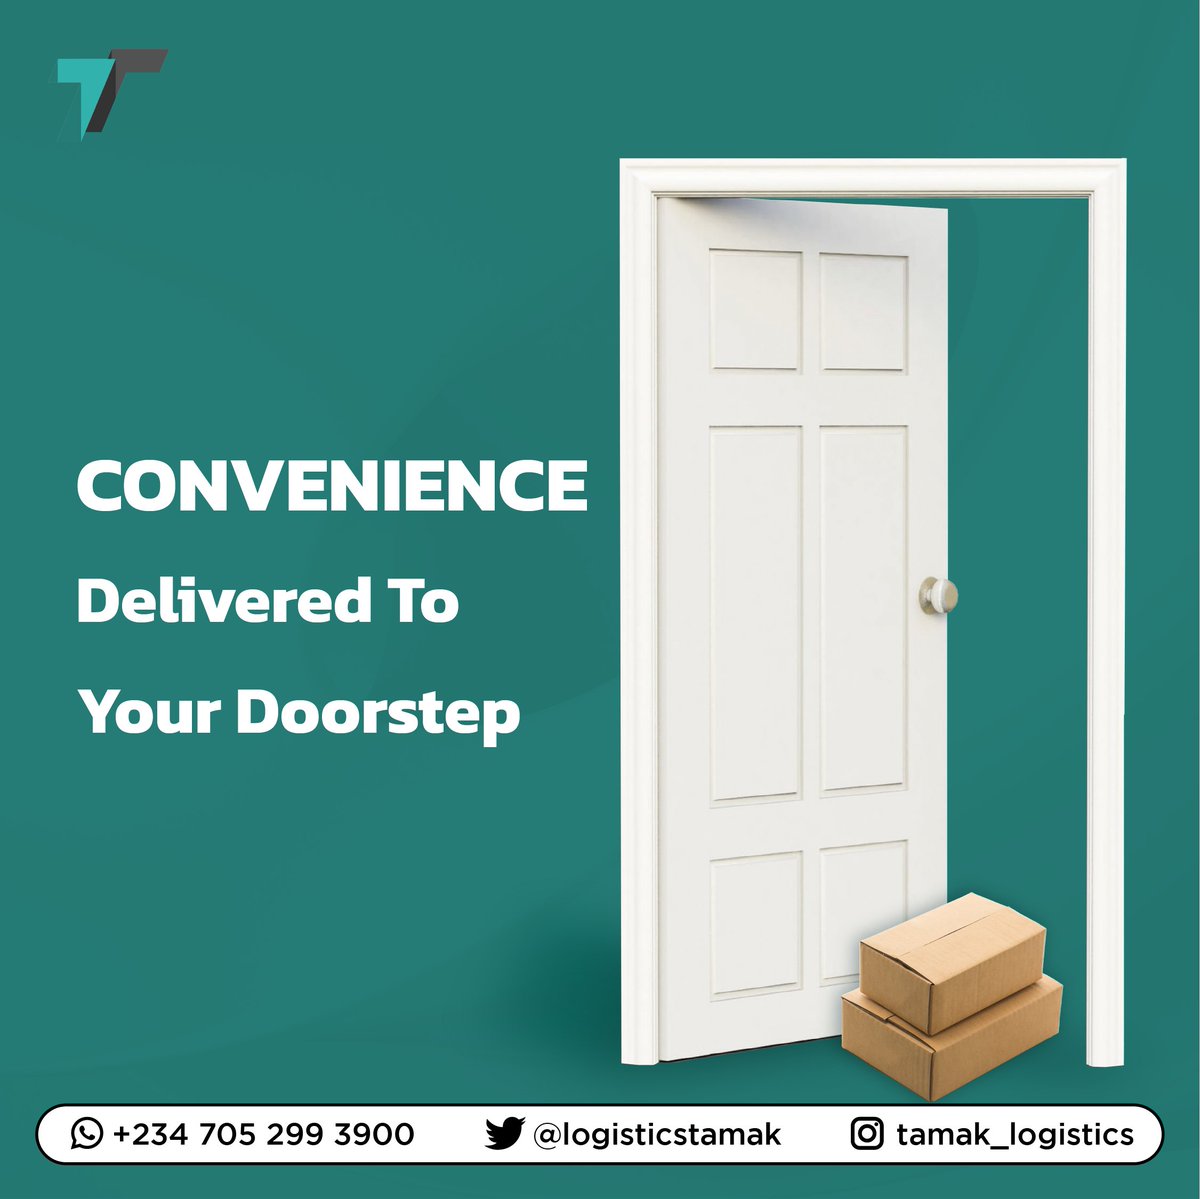 Enjoy the holiday with the dash of the chilled weather indoors, while we deliver your favorite package to your doorstep.

#Tamaklogistics #deliverydoneright #deliveryman #dispatchrider